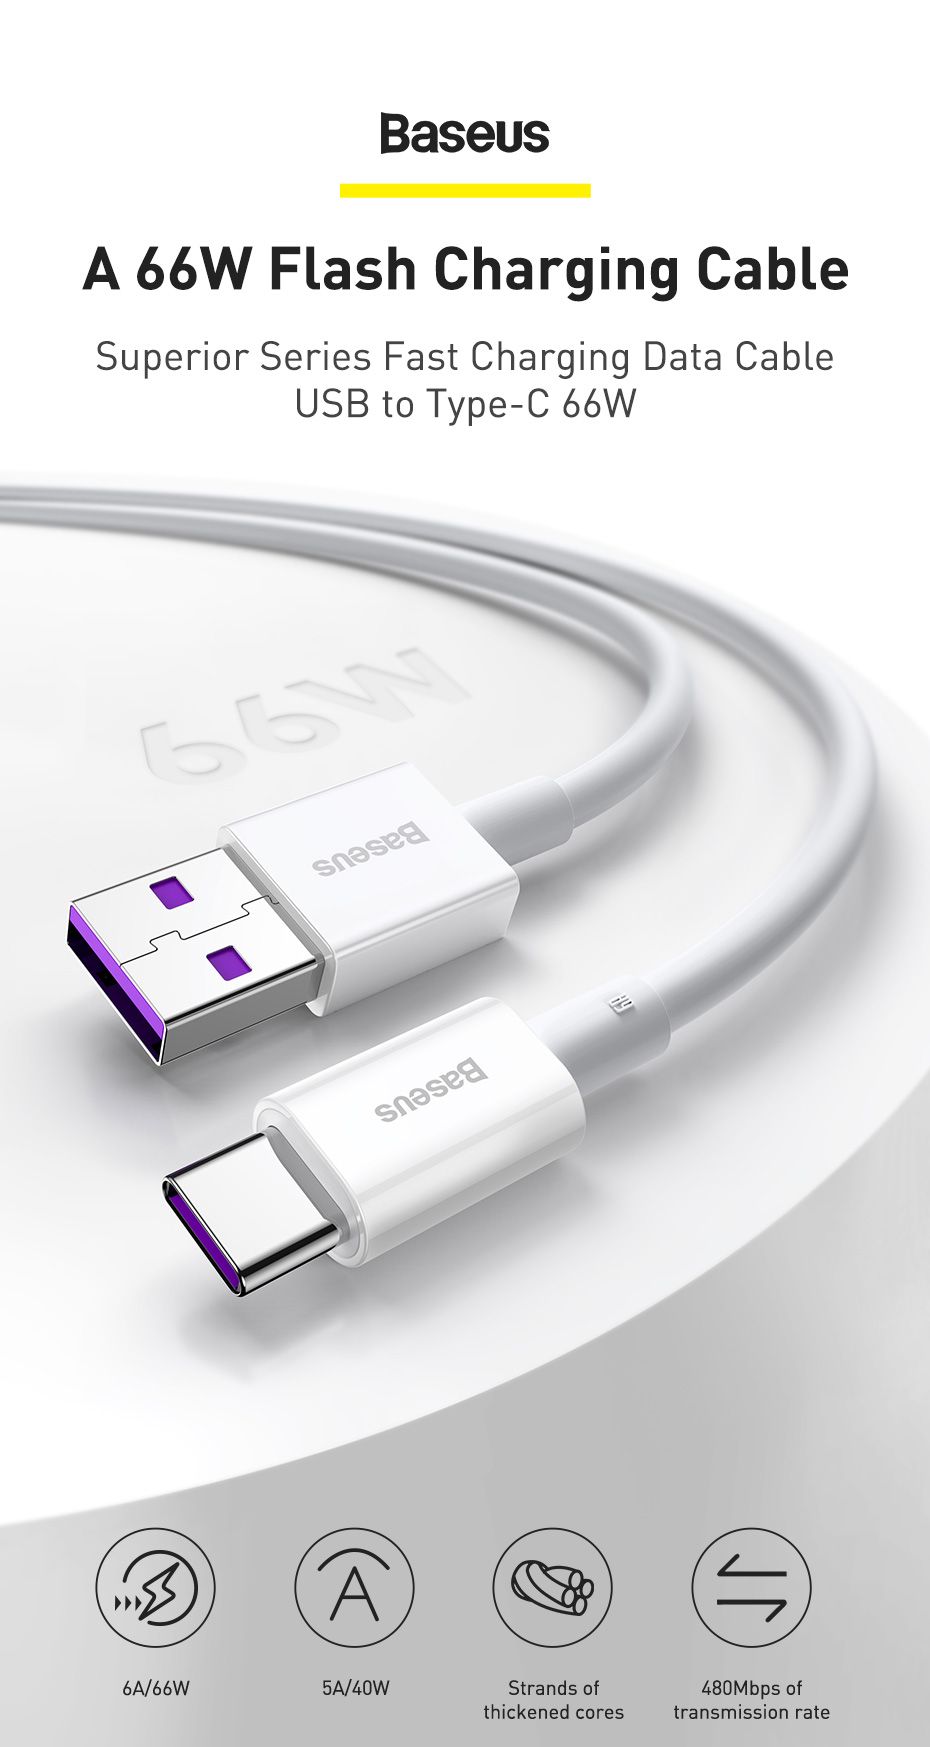 baseus superior series fast charging data cable usb to type c 66w 1